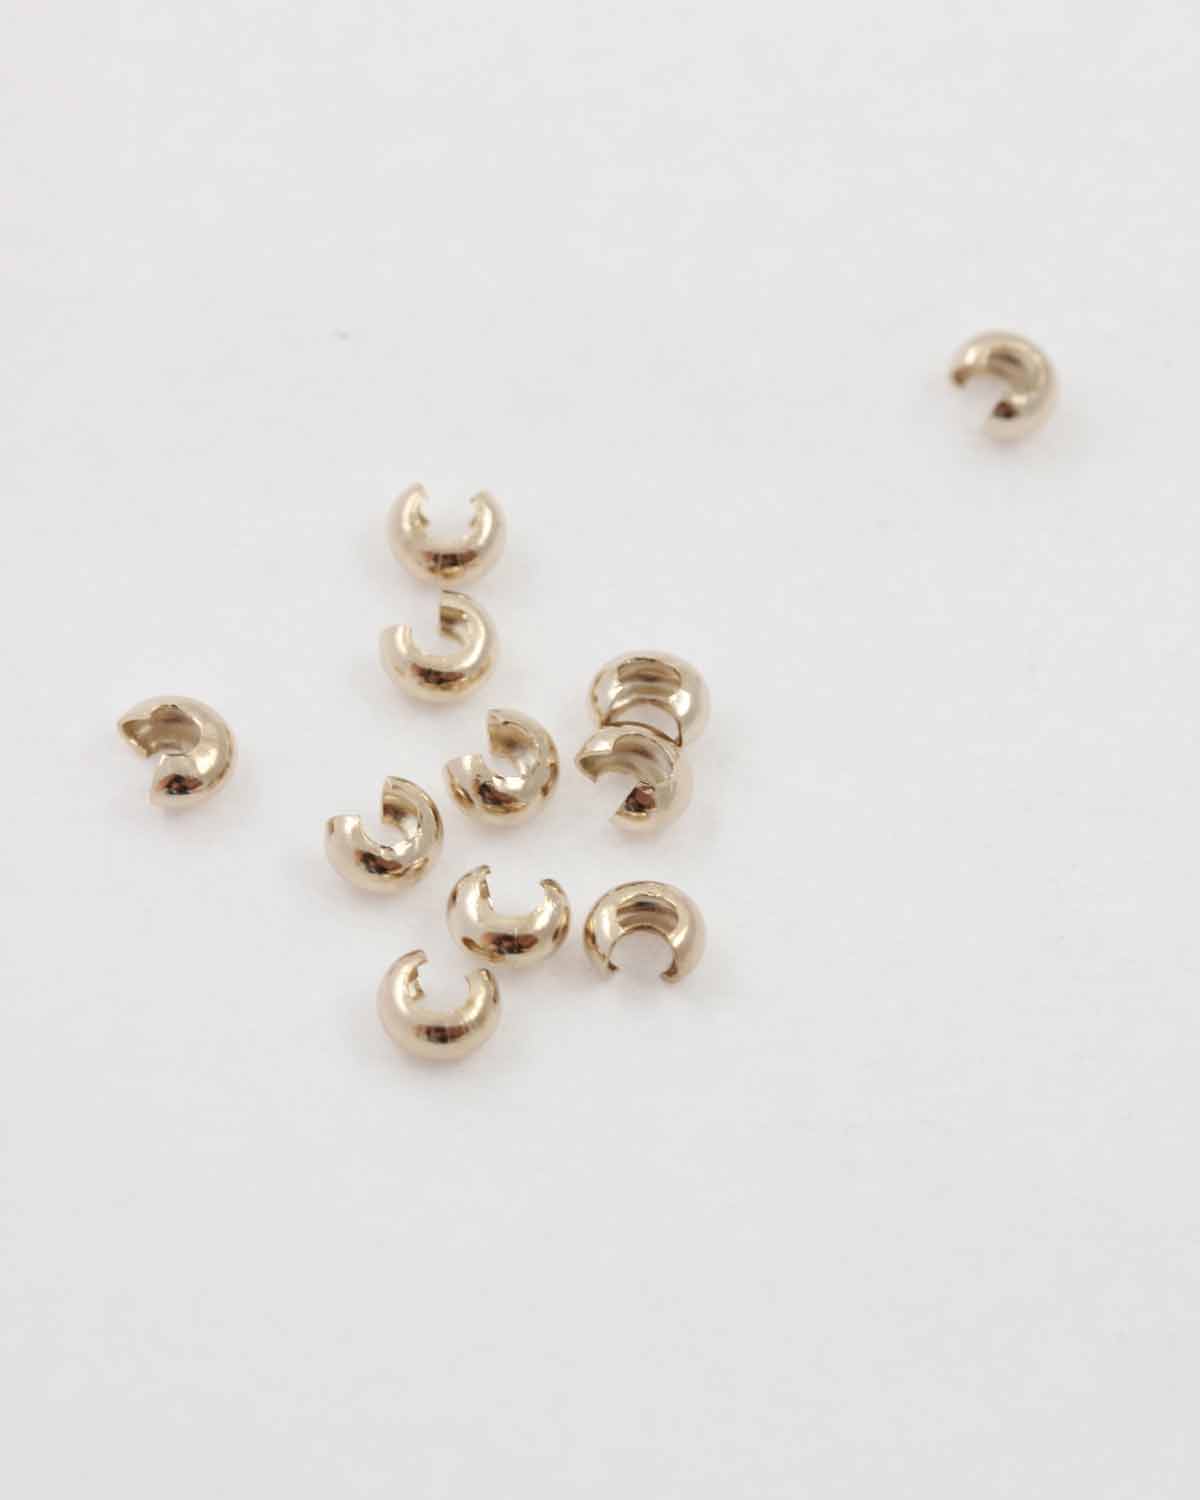 4mm Crimp Covers Gold Crimp Covers Silver Crimp Covers -  in